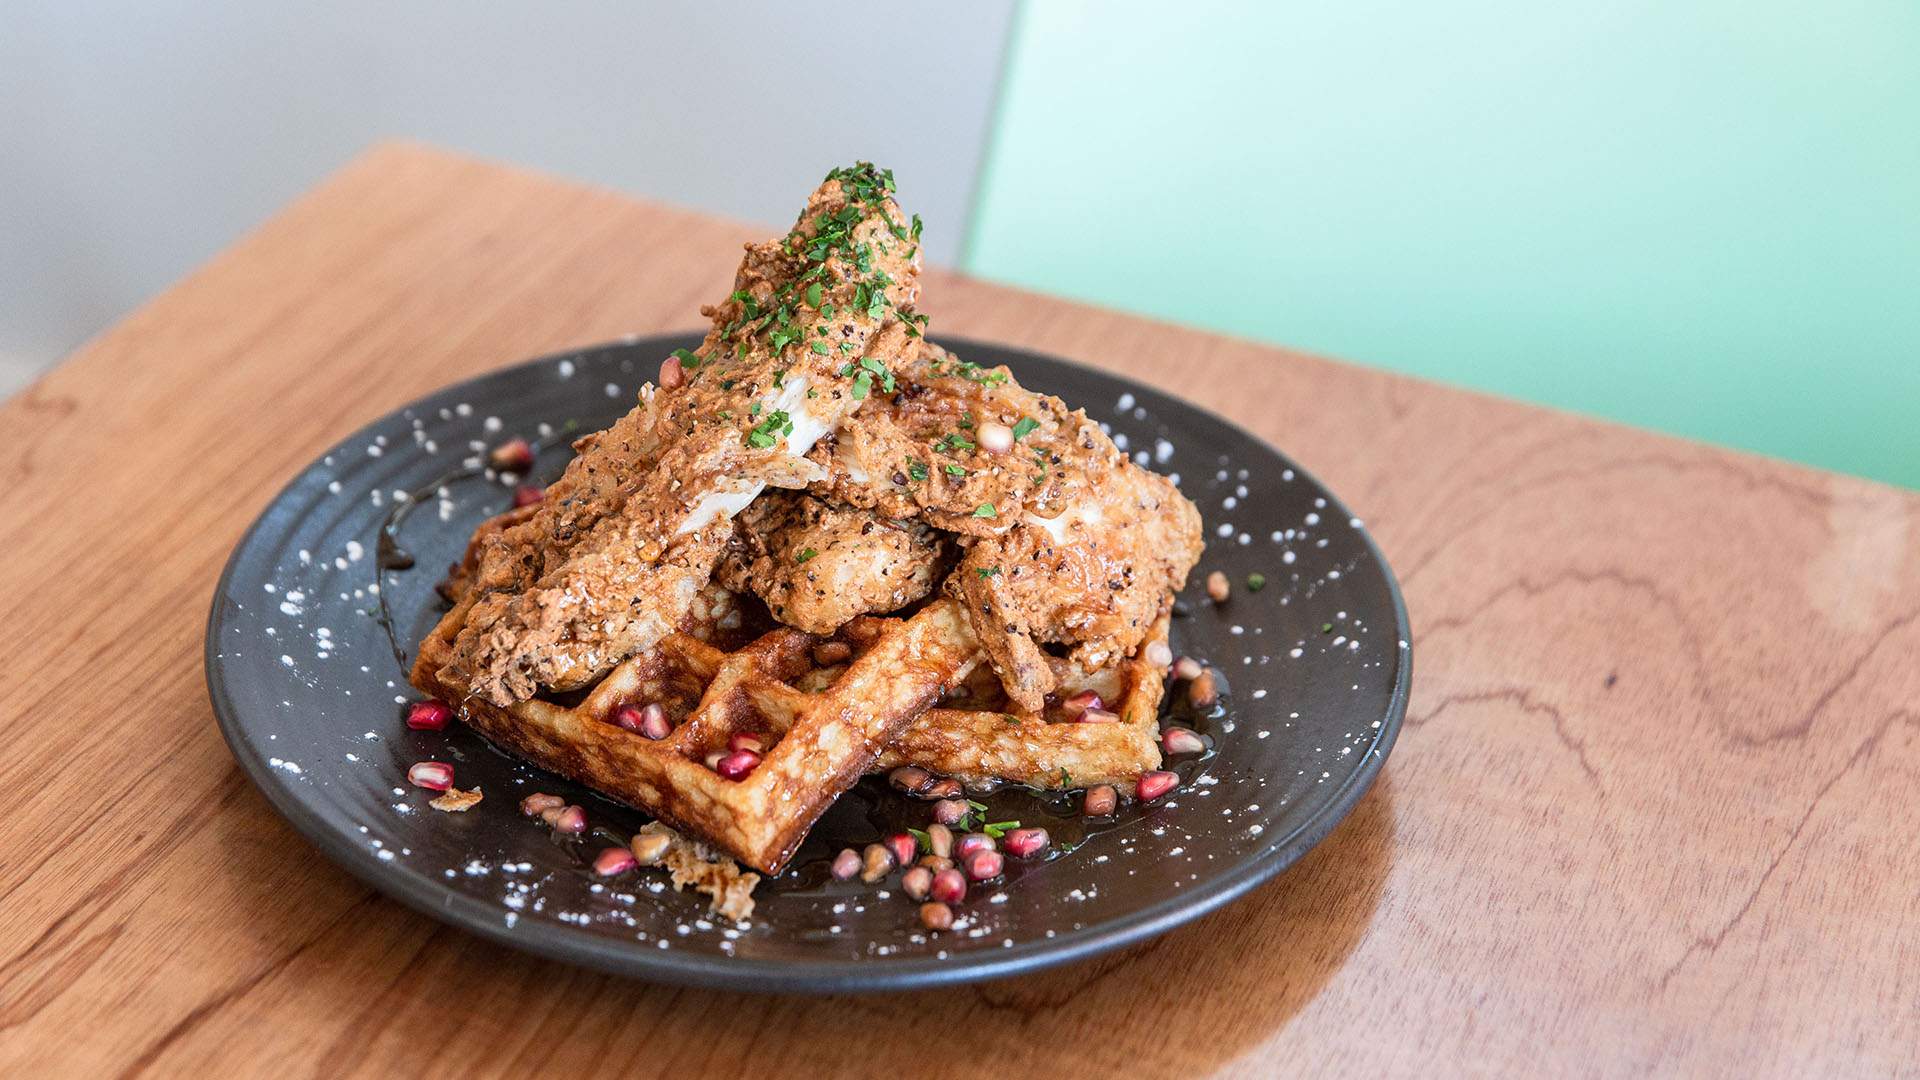 The Coventry Is South Melbourne's New Greenery-Filled Daytime Eatery